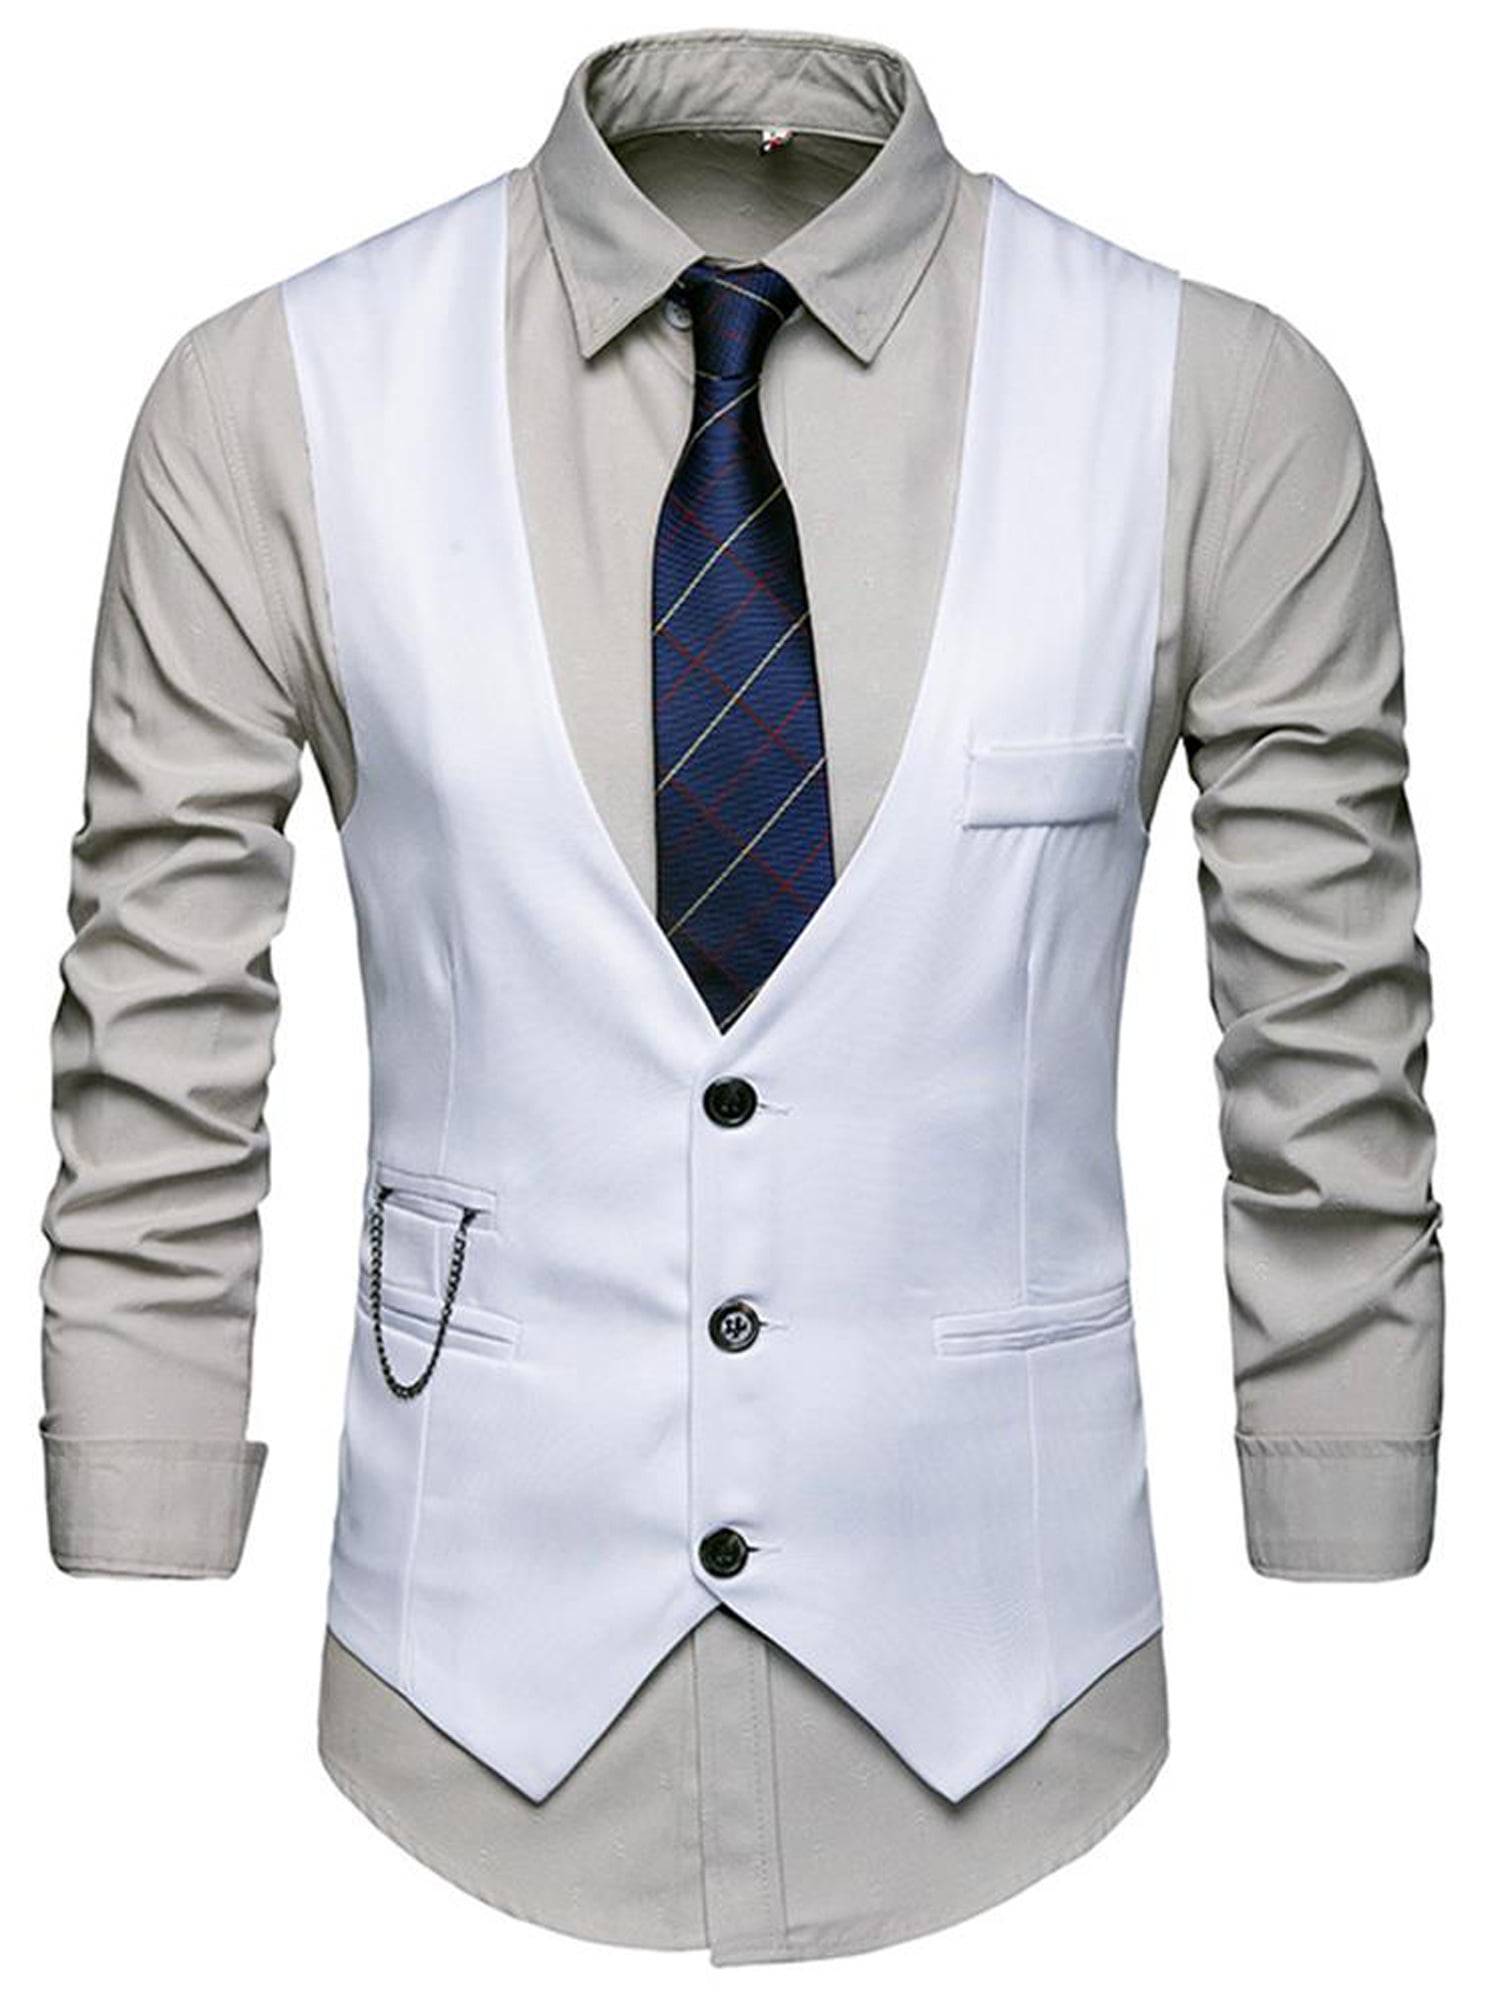 UPAIRC Mens Business Wedding Vest Formal Office Work Party